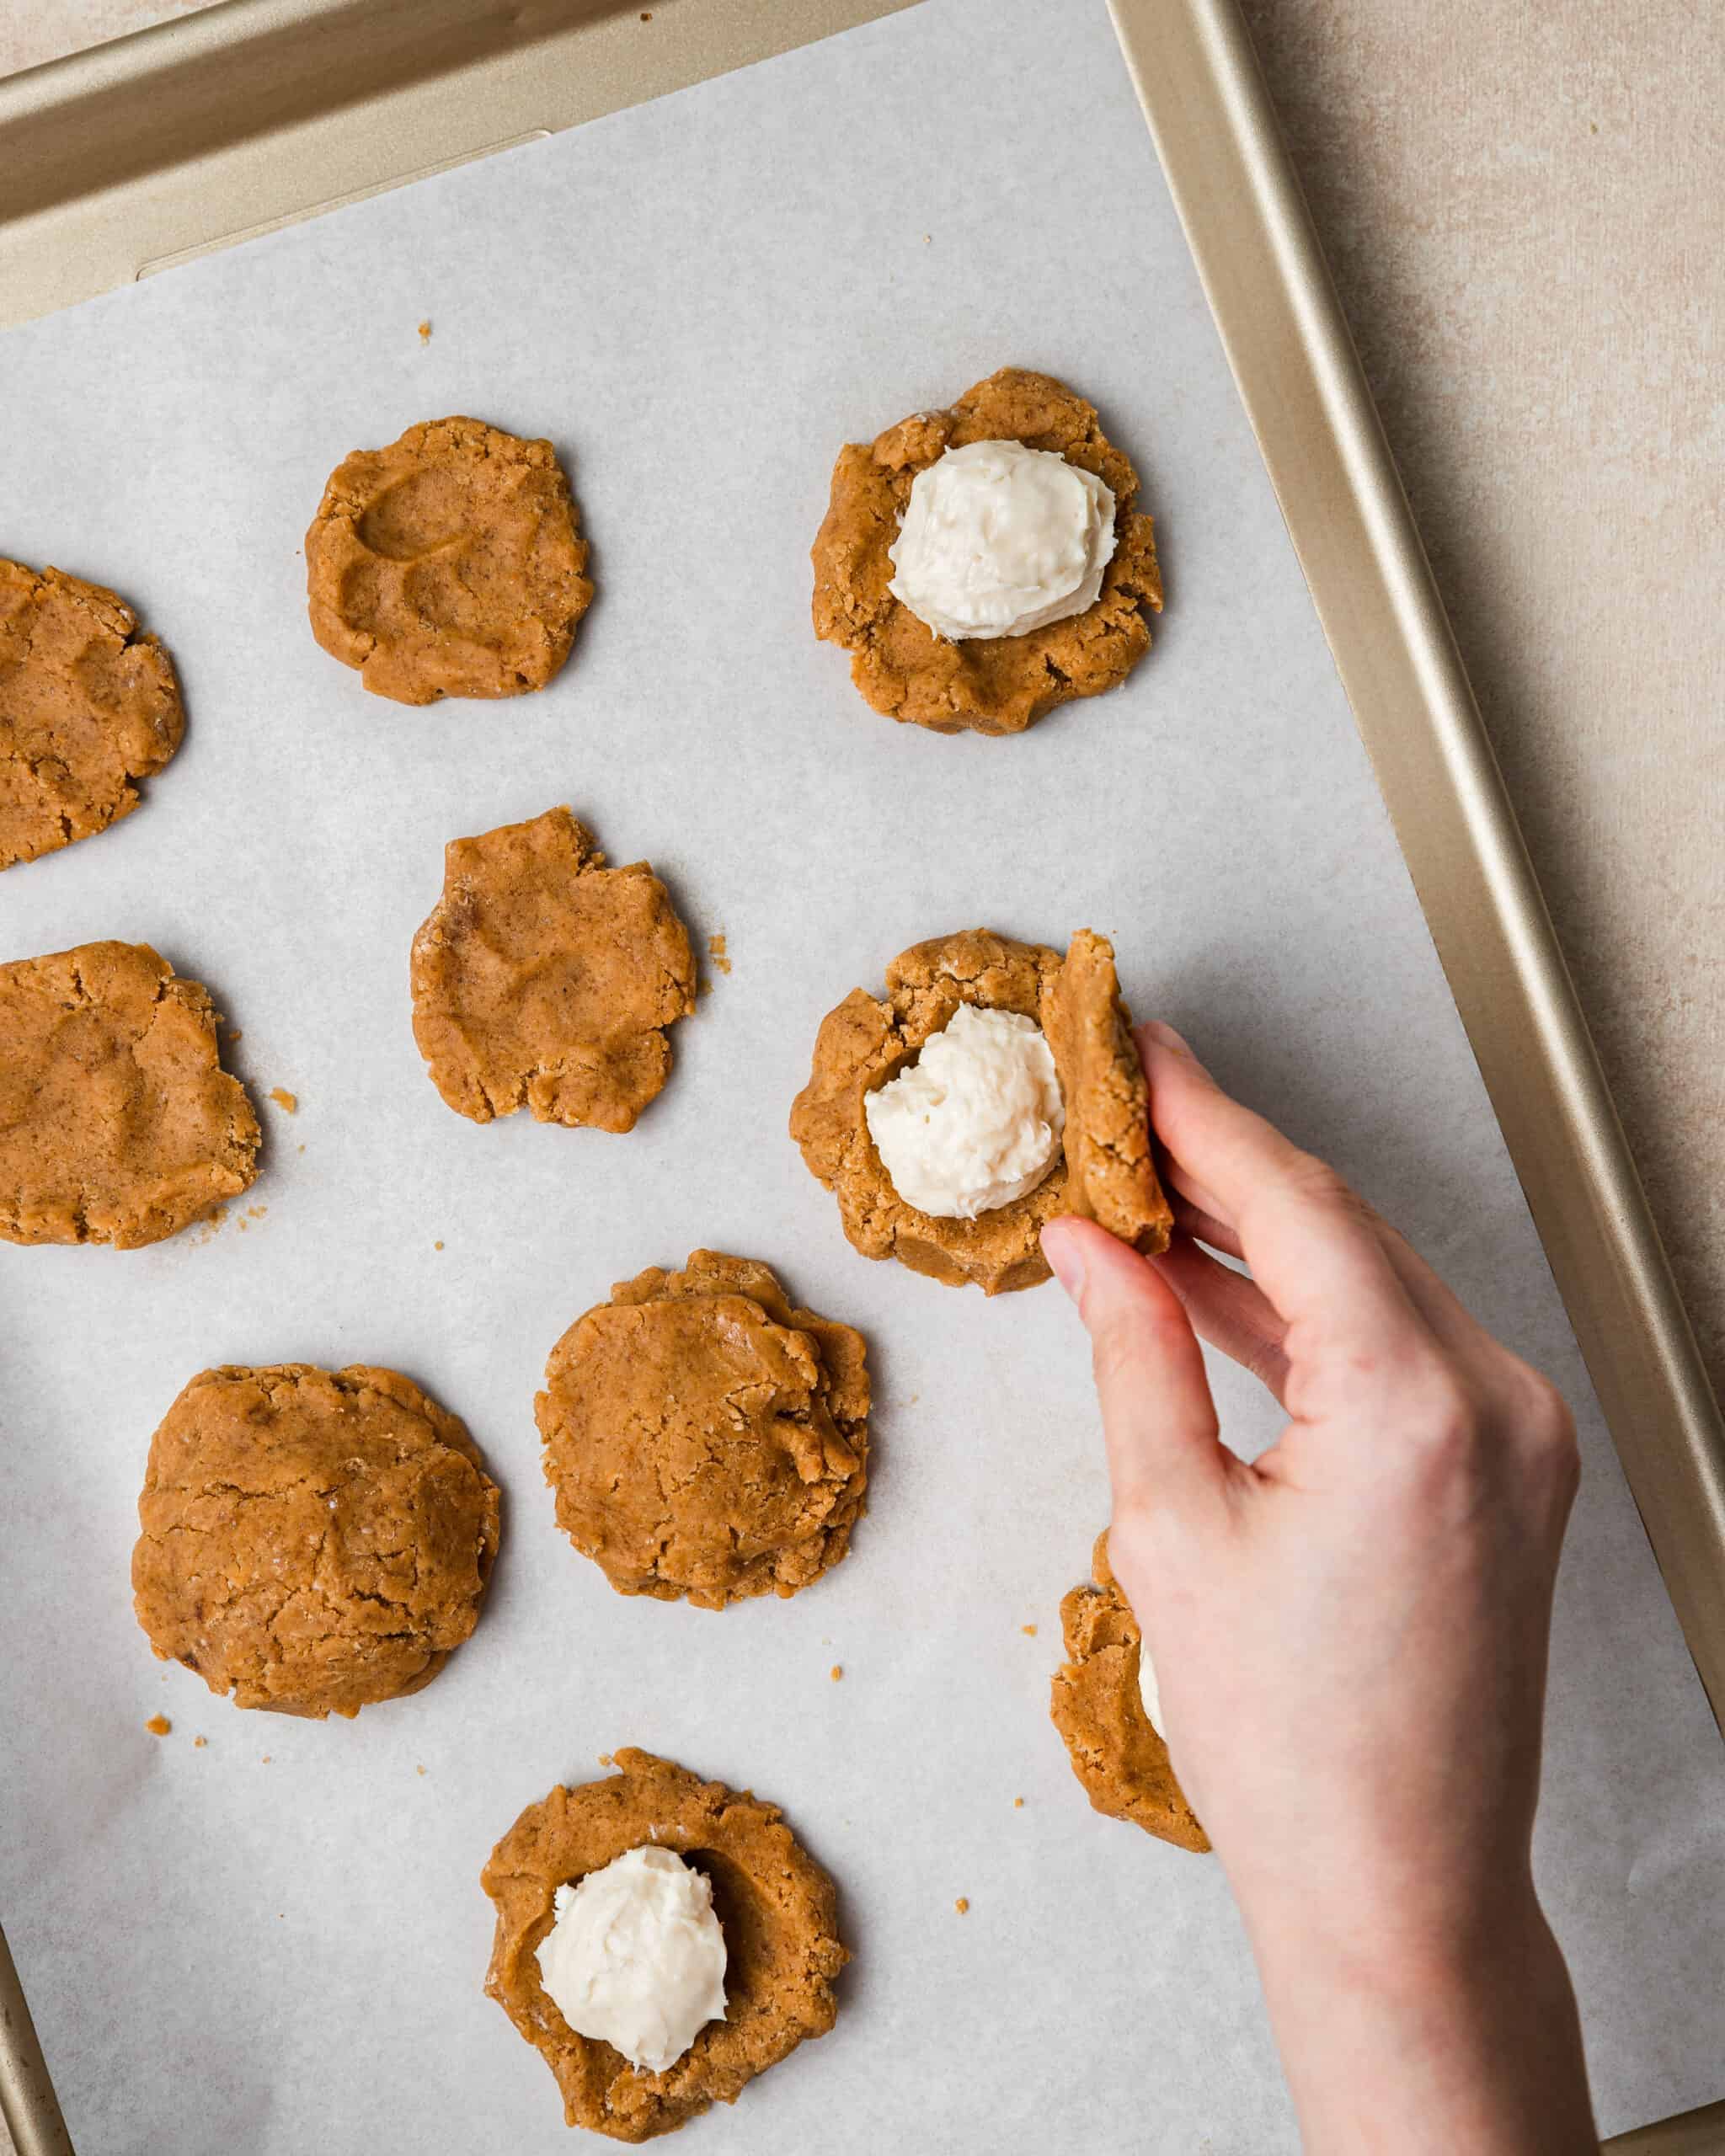 putting cream cheese in pockets of the cookies.